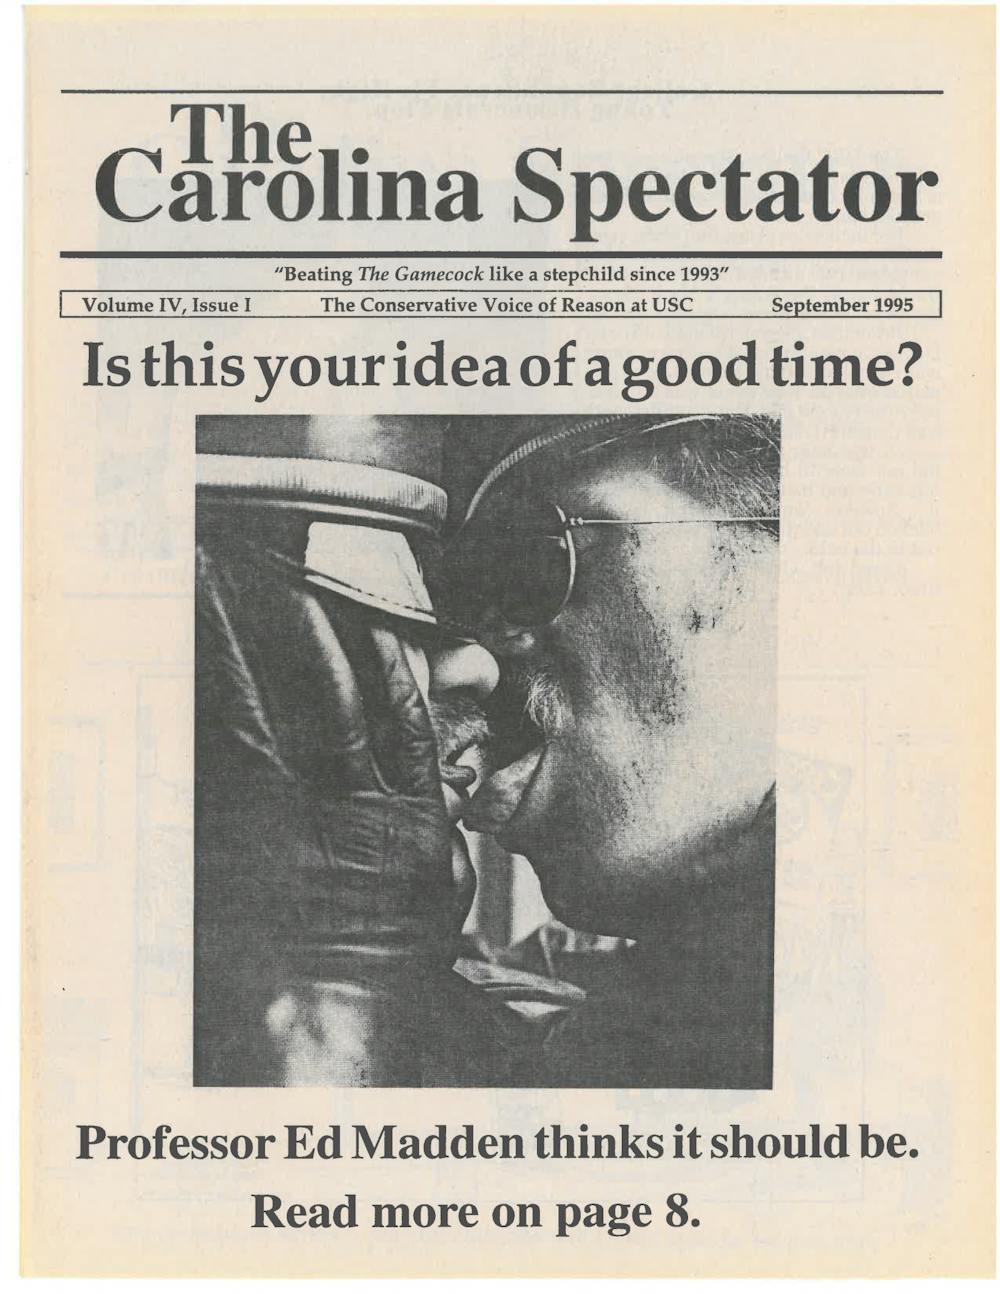 <p>A scan of the cover of Vol. 4, No. 1 of the Carolina Spectator's September 1995 issue. The Carolina Spectator was a conservative newspaper at USC run by Vernon C. Davenport in the 90s. Its last issue was published in March 1996 (Vol. 4, No. 3) before the title of the periodical changed to The Back Forty Review, having its last volume published in December 1996.</p>